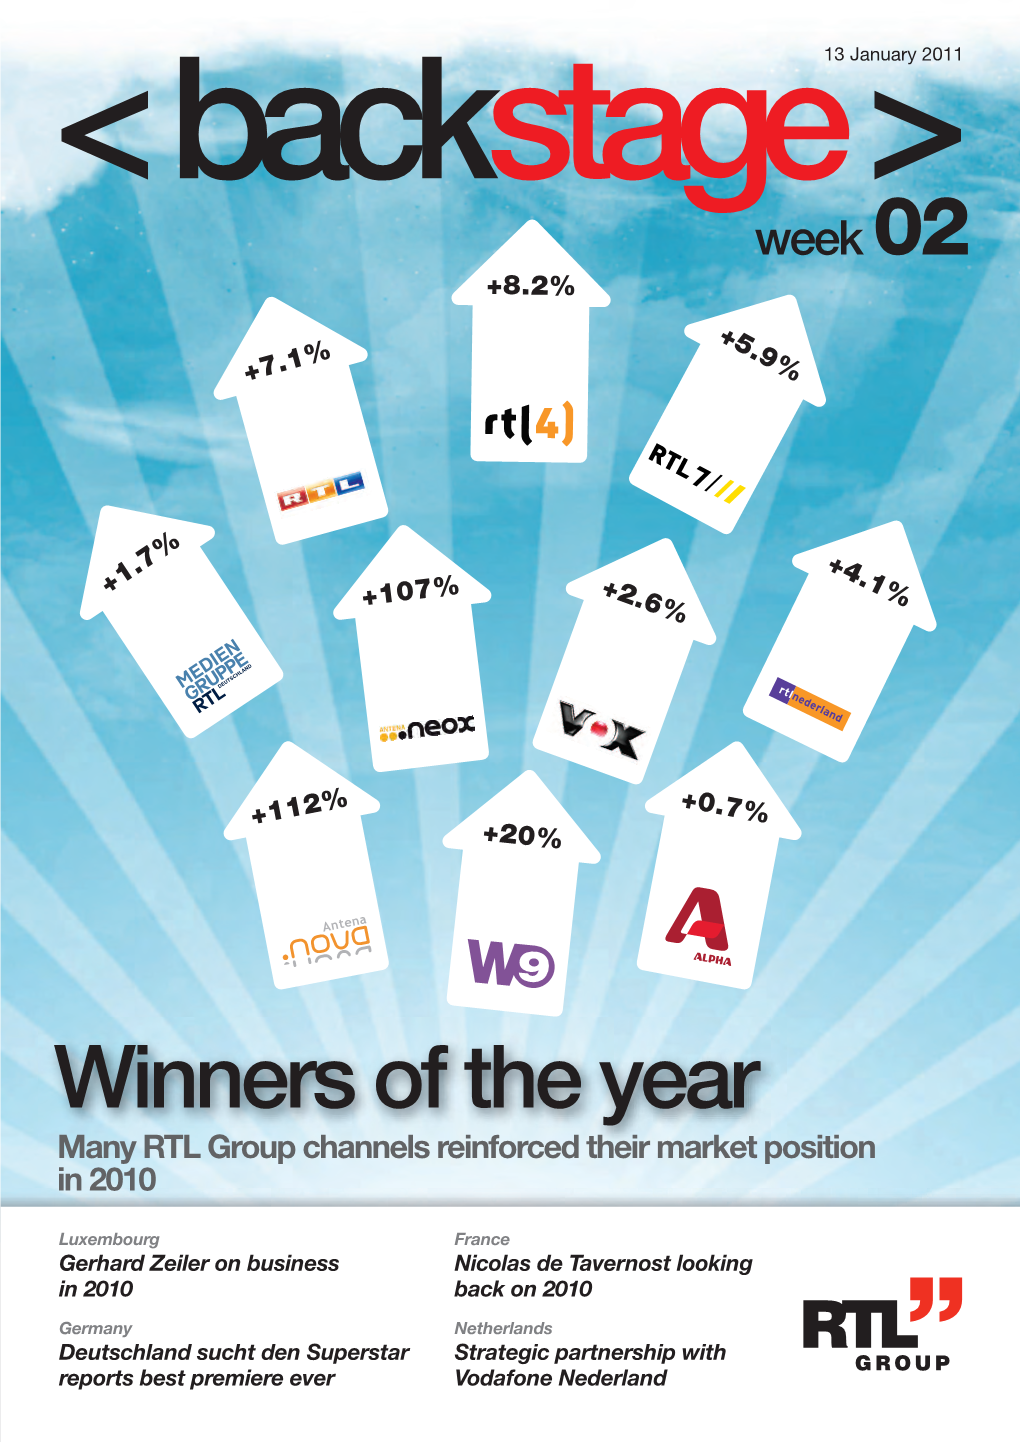 Winners of the Year Many RTL Group Channels Reinforced Their Market Position in 2010